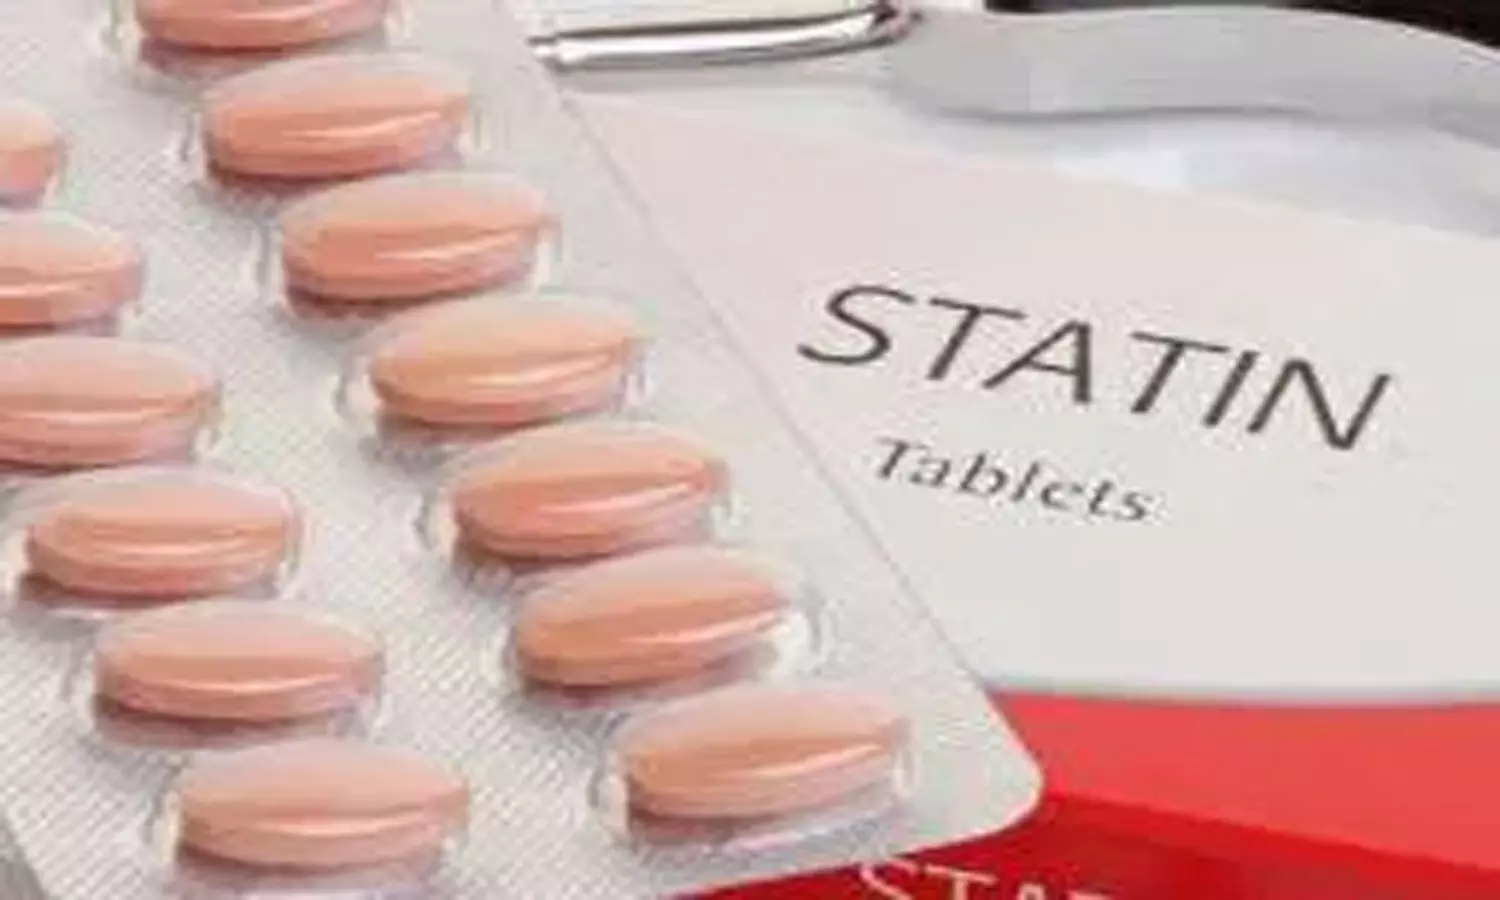 Statins may reduce cancer risk through mechanisms separate to cholesterol